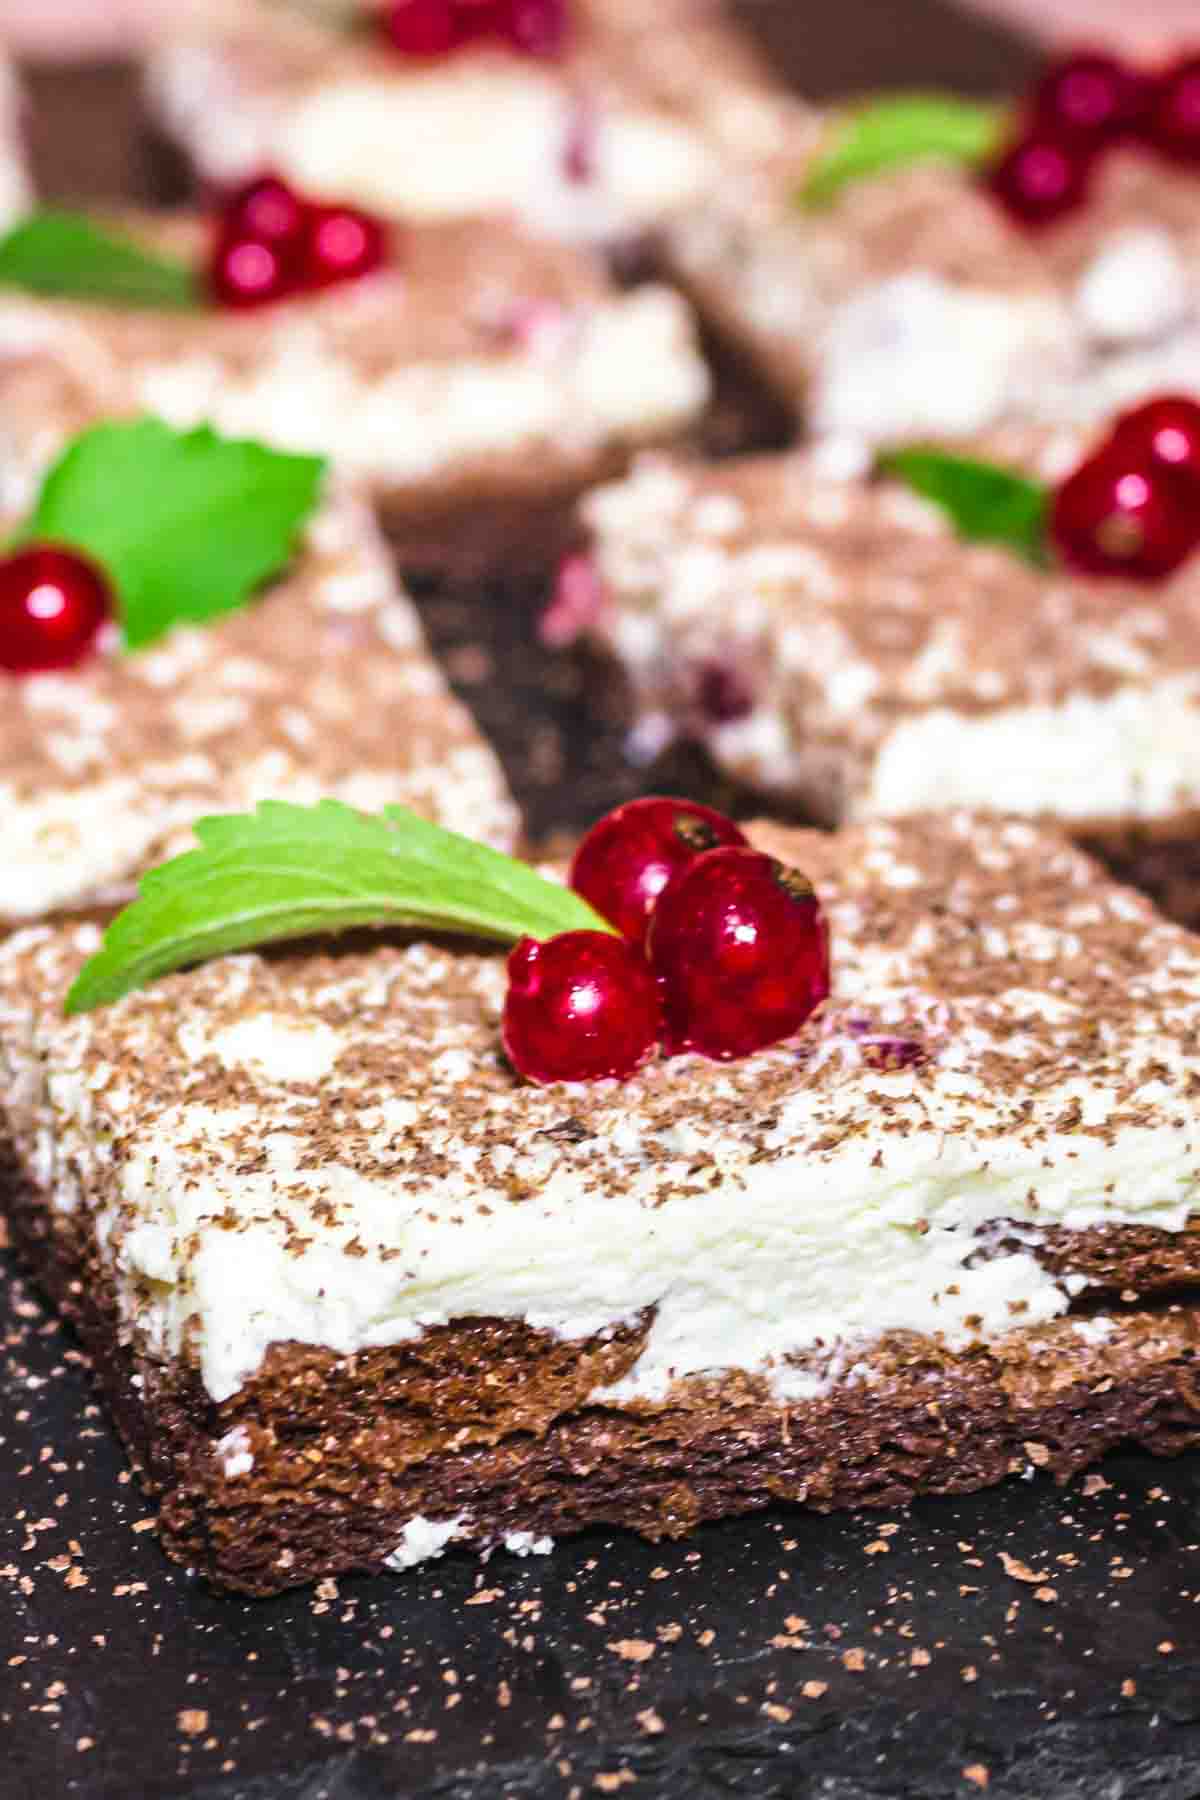 Flourless chocolate cake recipe with currant.